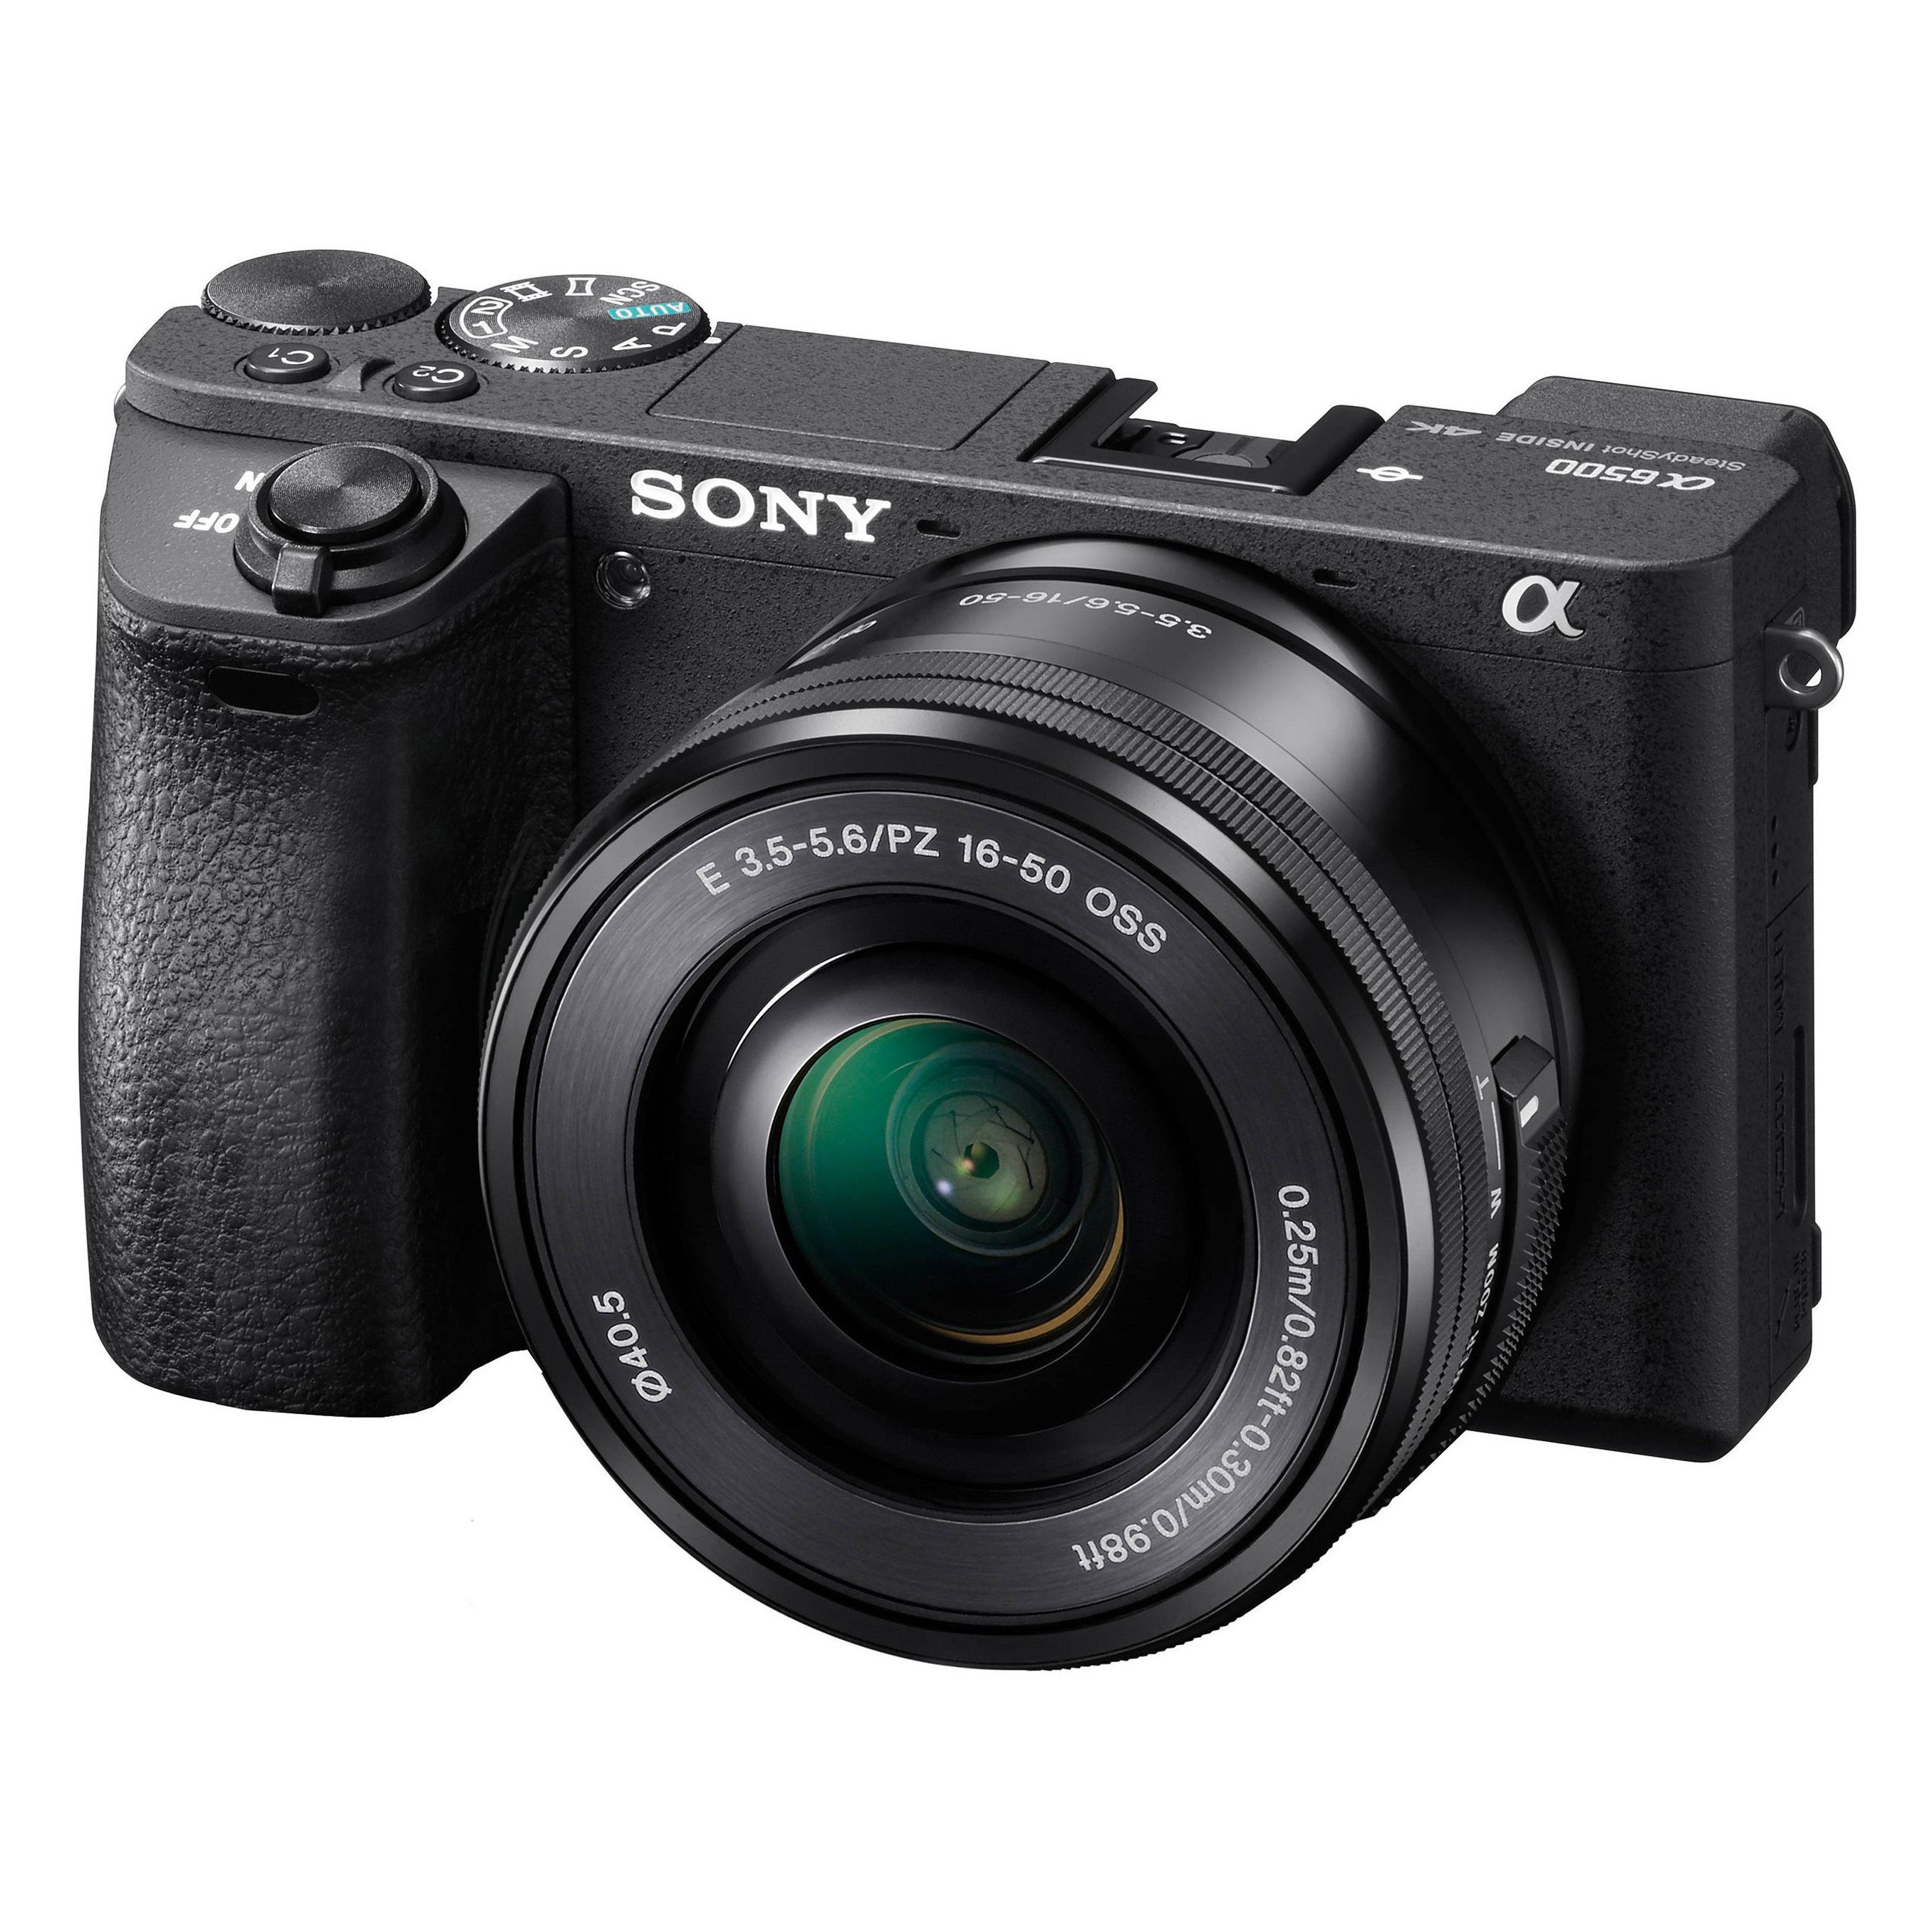 8 Best Sony Camera Reviews in 2018 - Top Rated Digital and DSLR Sony